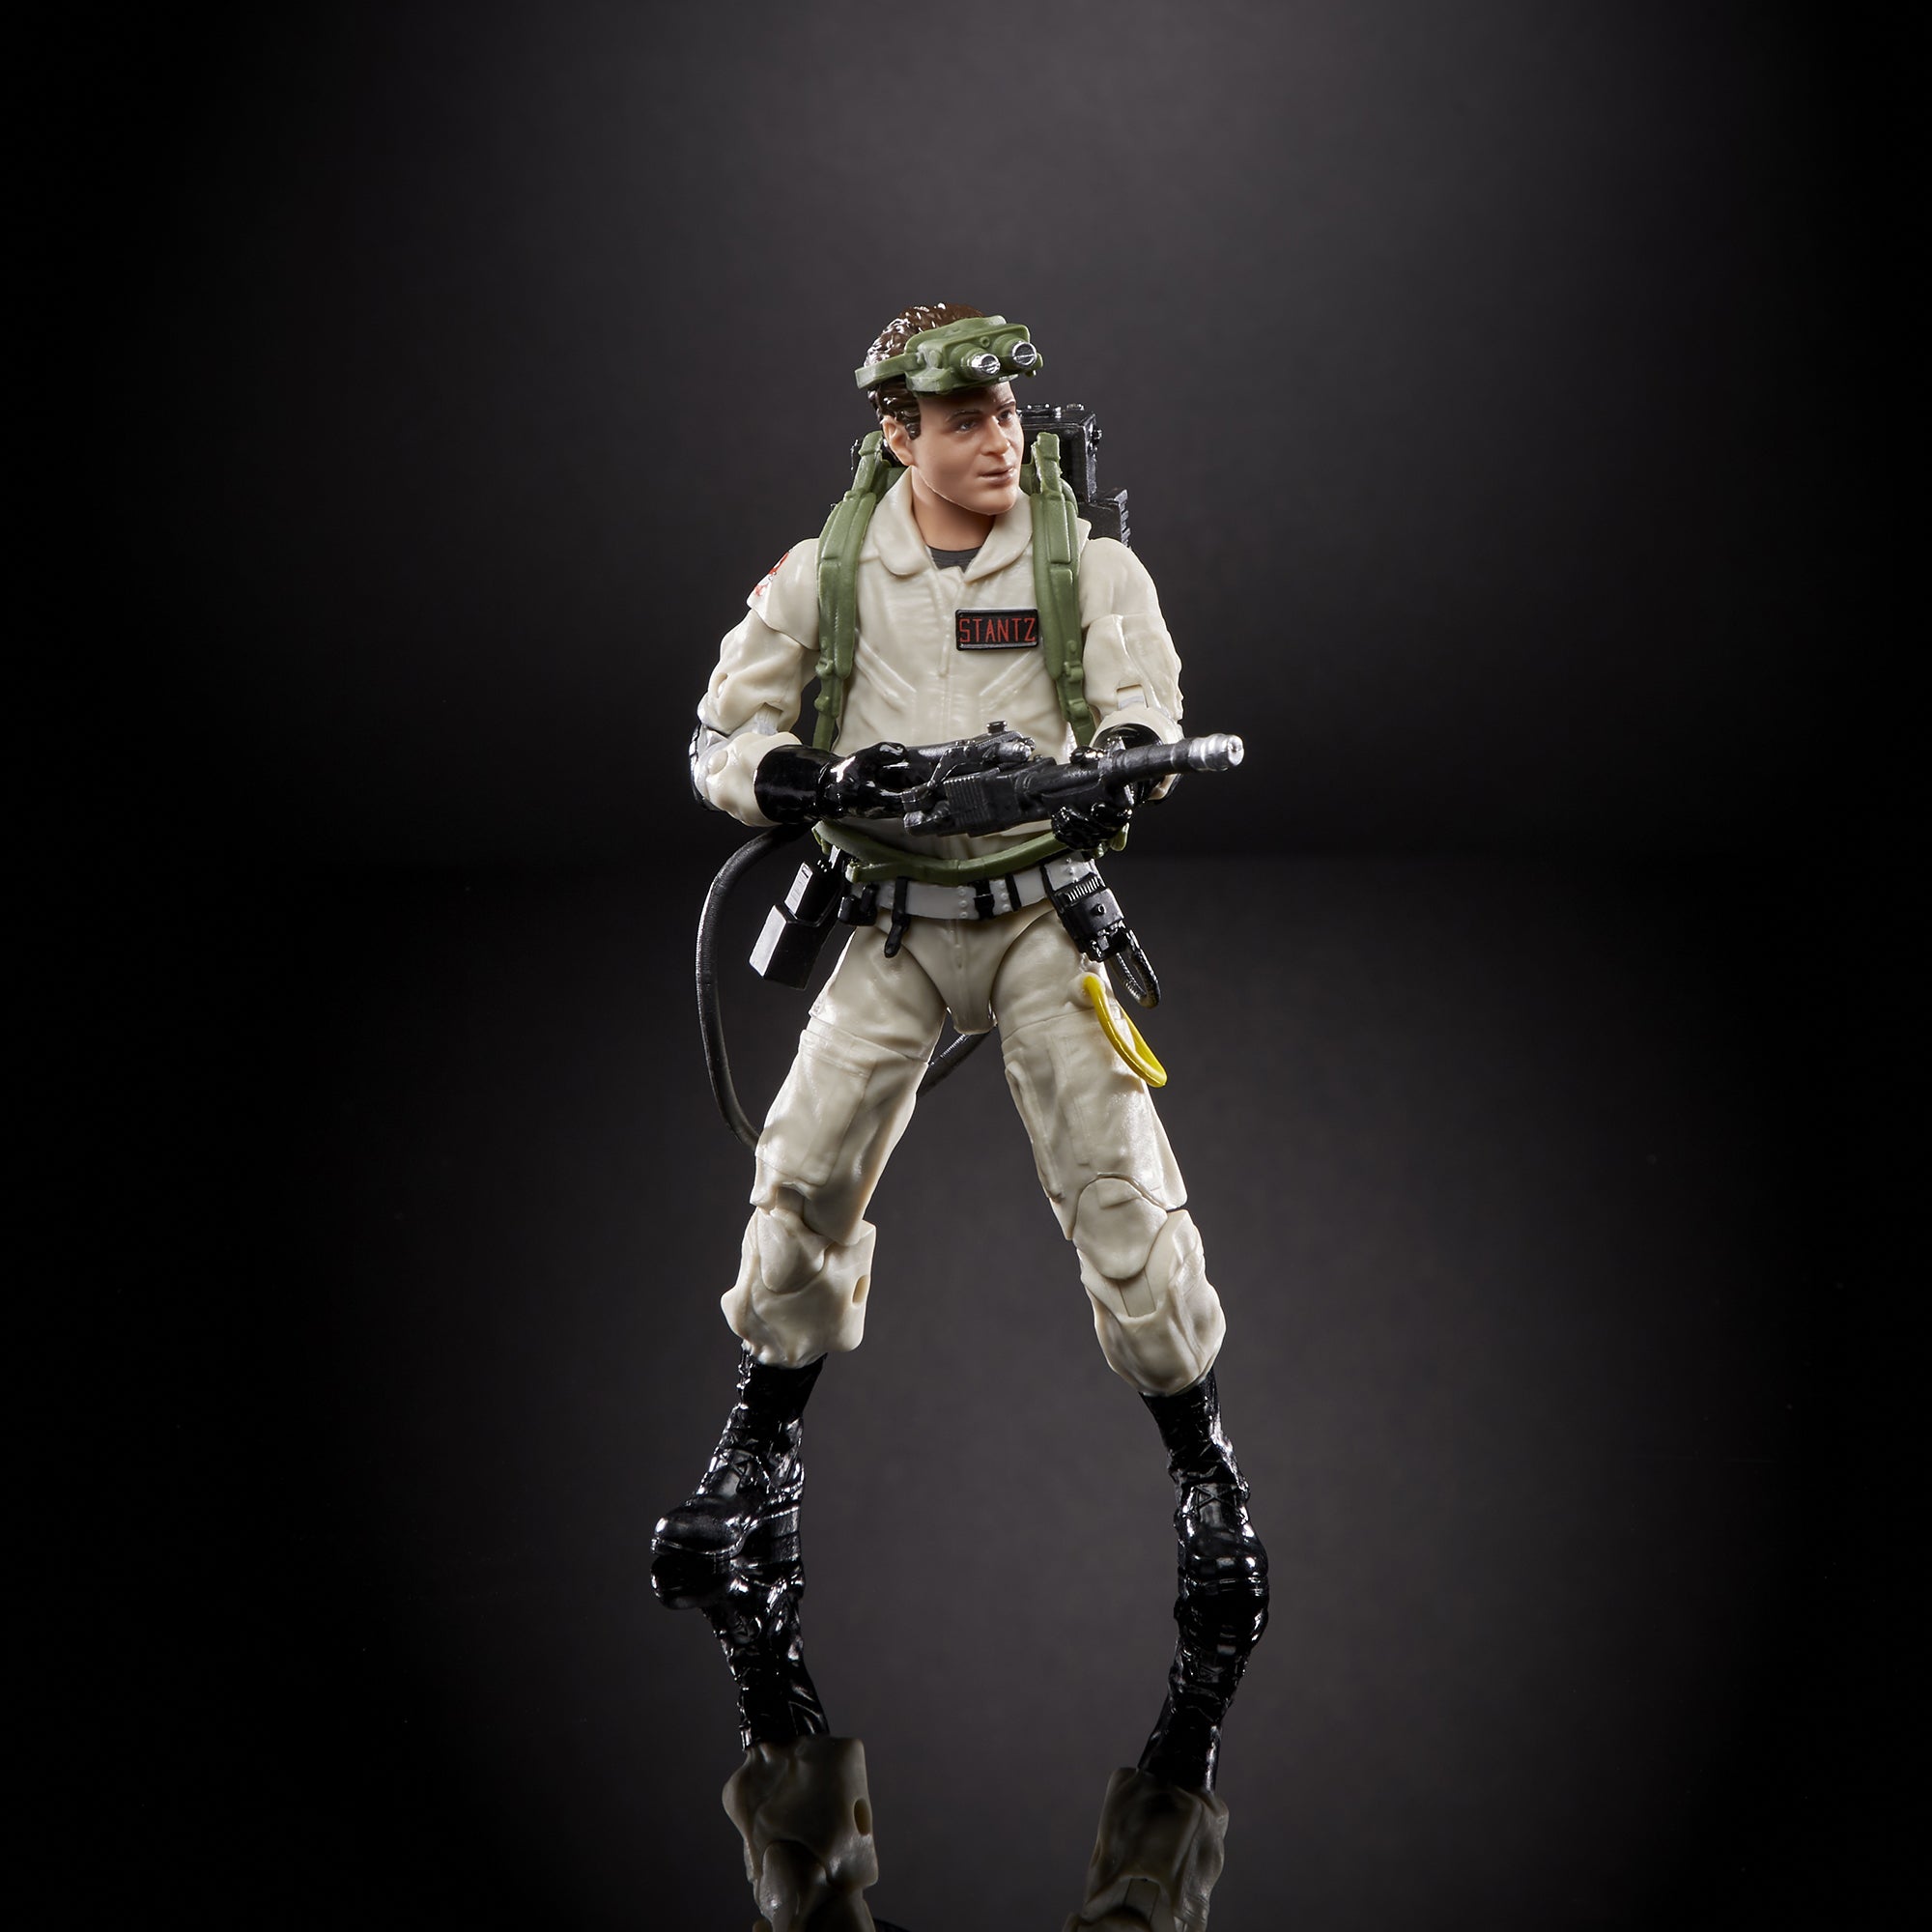 Ghostbusters Plasma Series HasLab Two in the Box! Ghost Trap and P.K.E –  Hasbro Pulse